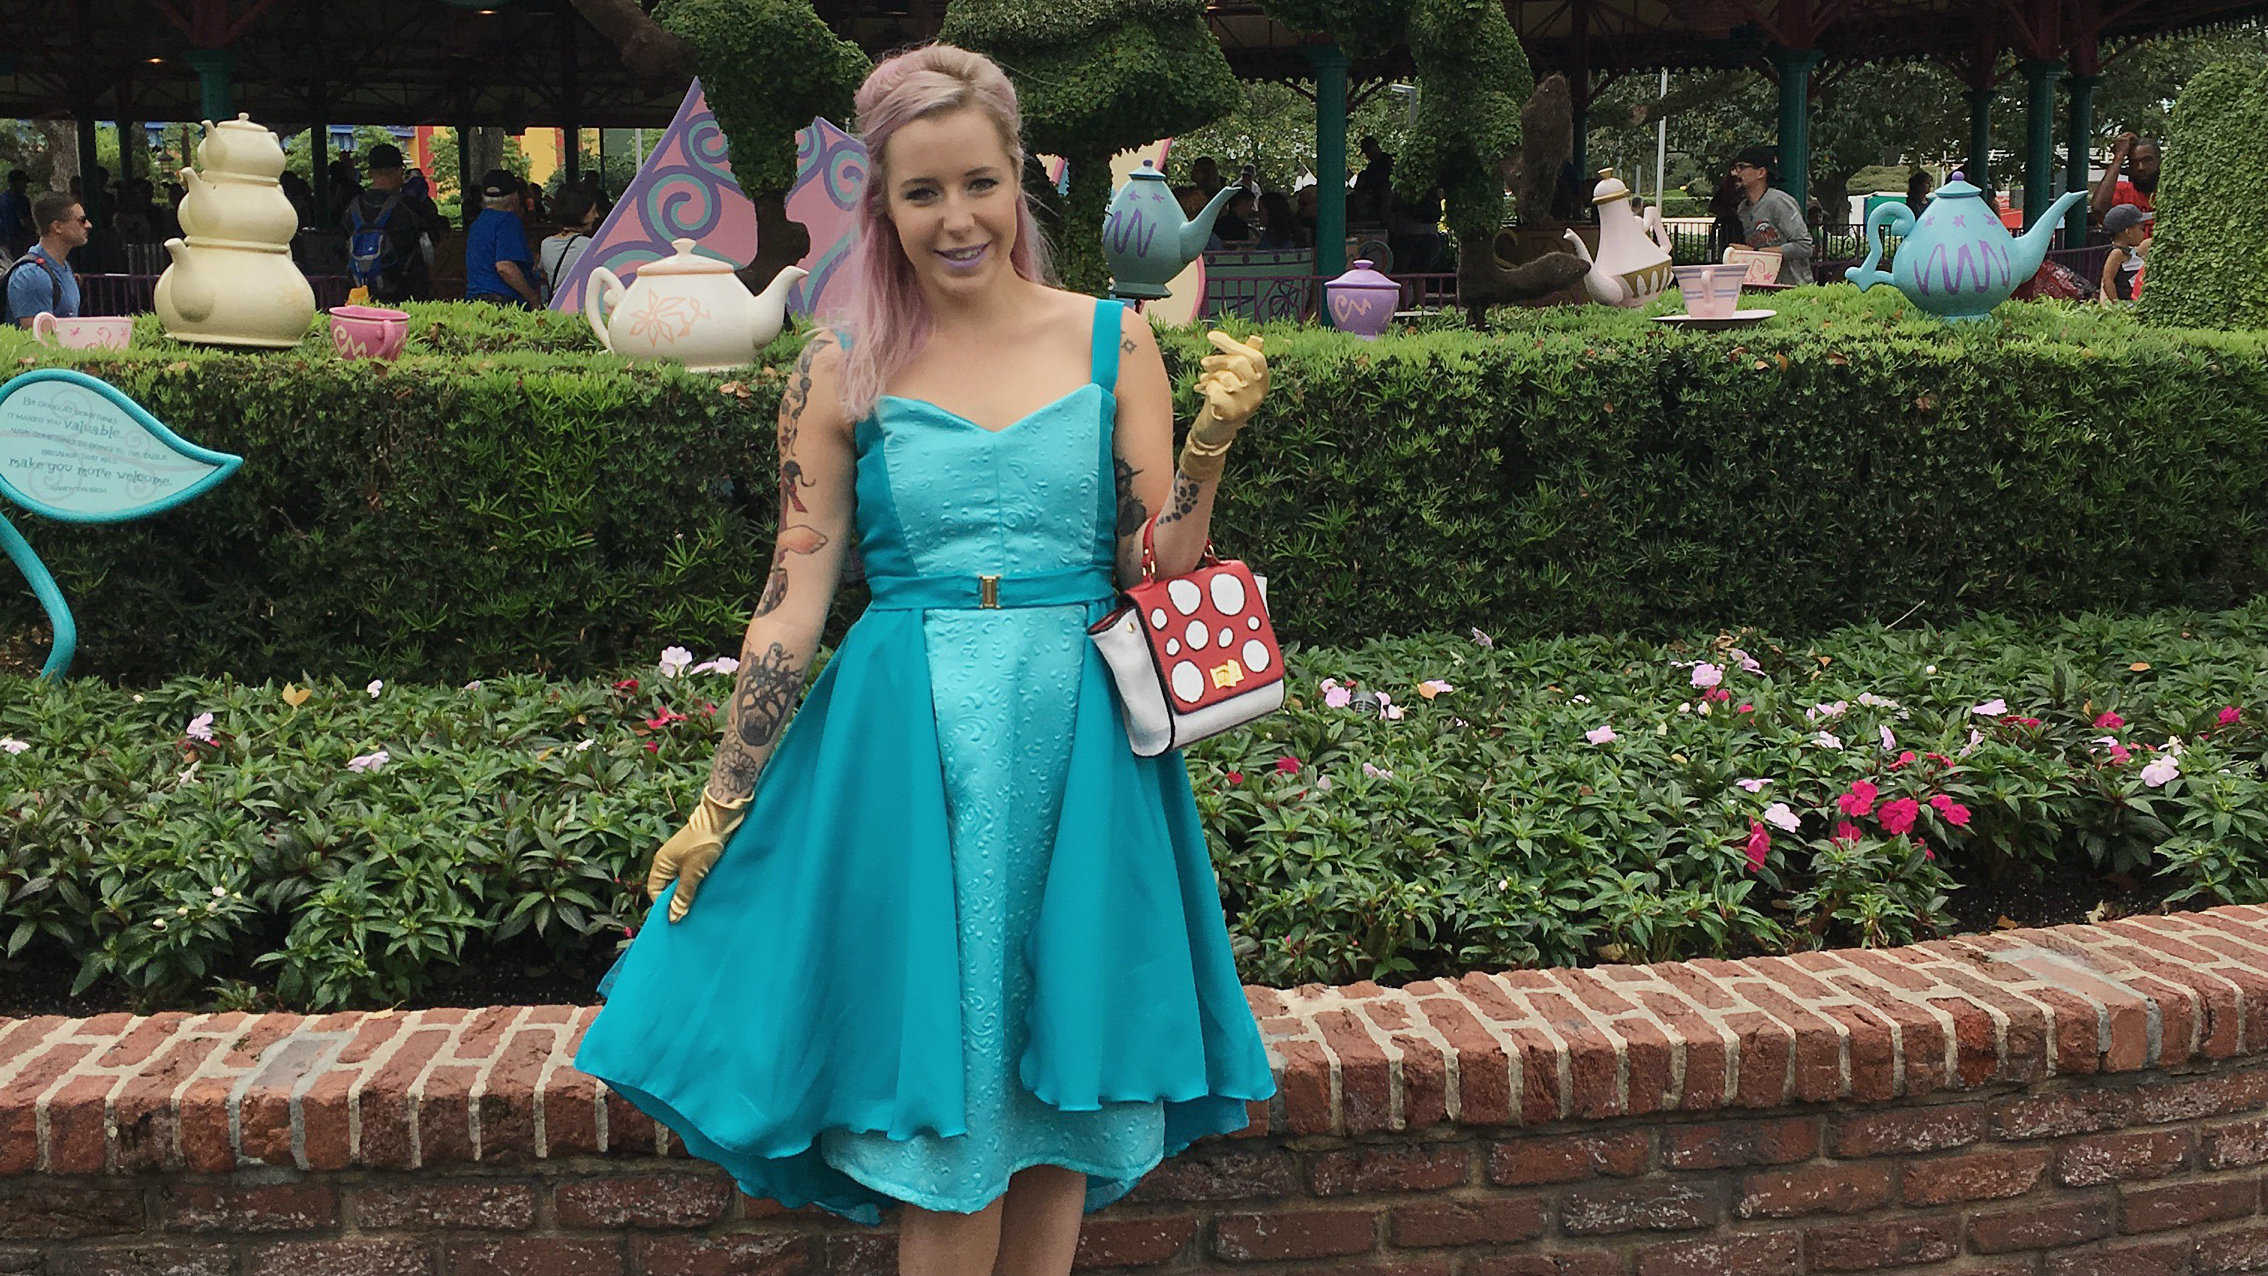 Leslie DisneyBounding as the Caterpillar from Alice in Wonderland on Dapper Day